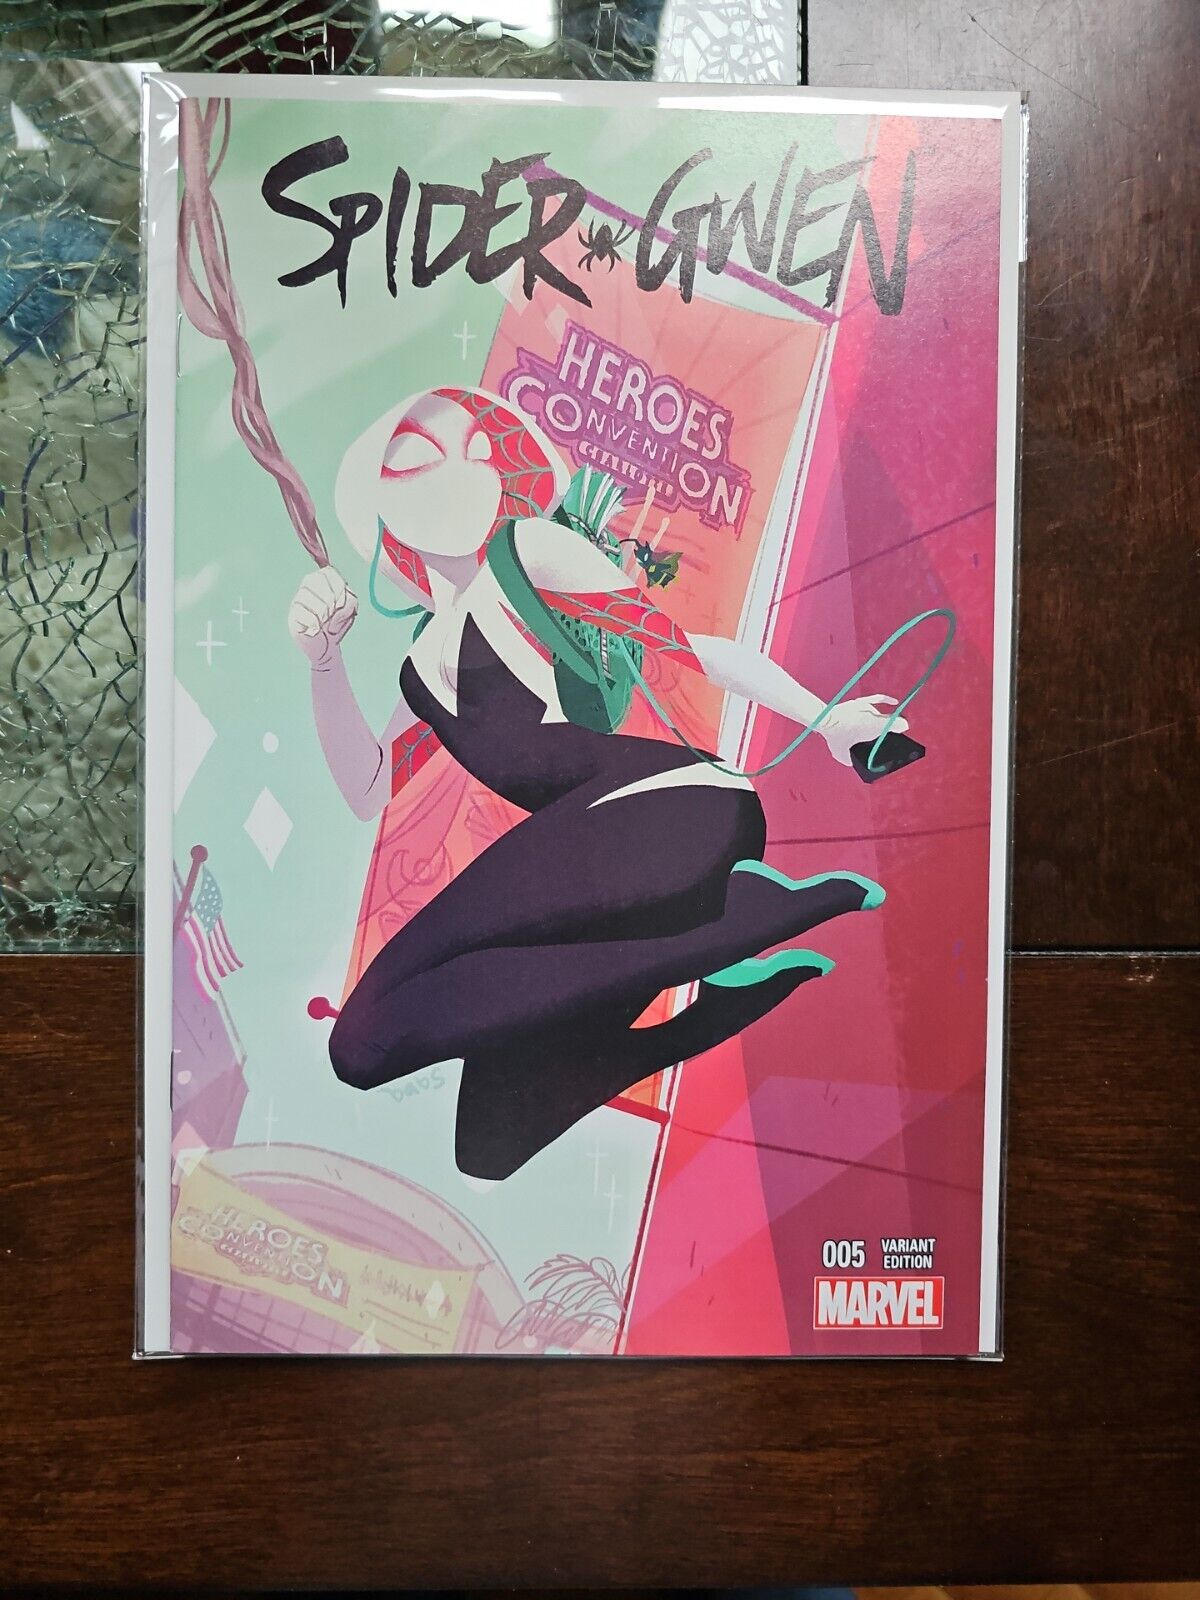 Spider-Gwen #5, Est. NM+, Charlotte Heroes Con 2015, Babs Tarr Cover, HTF, PC3